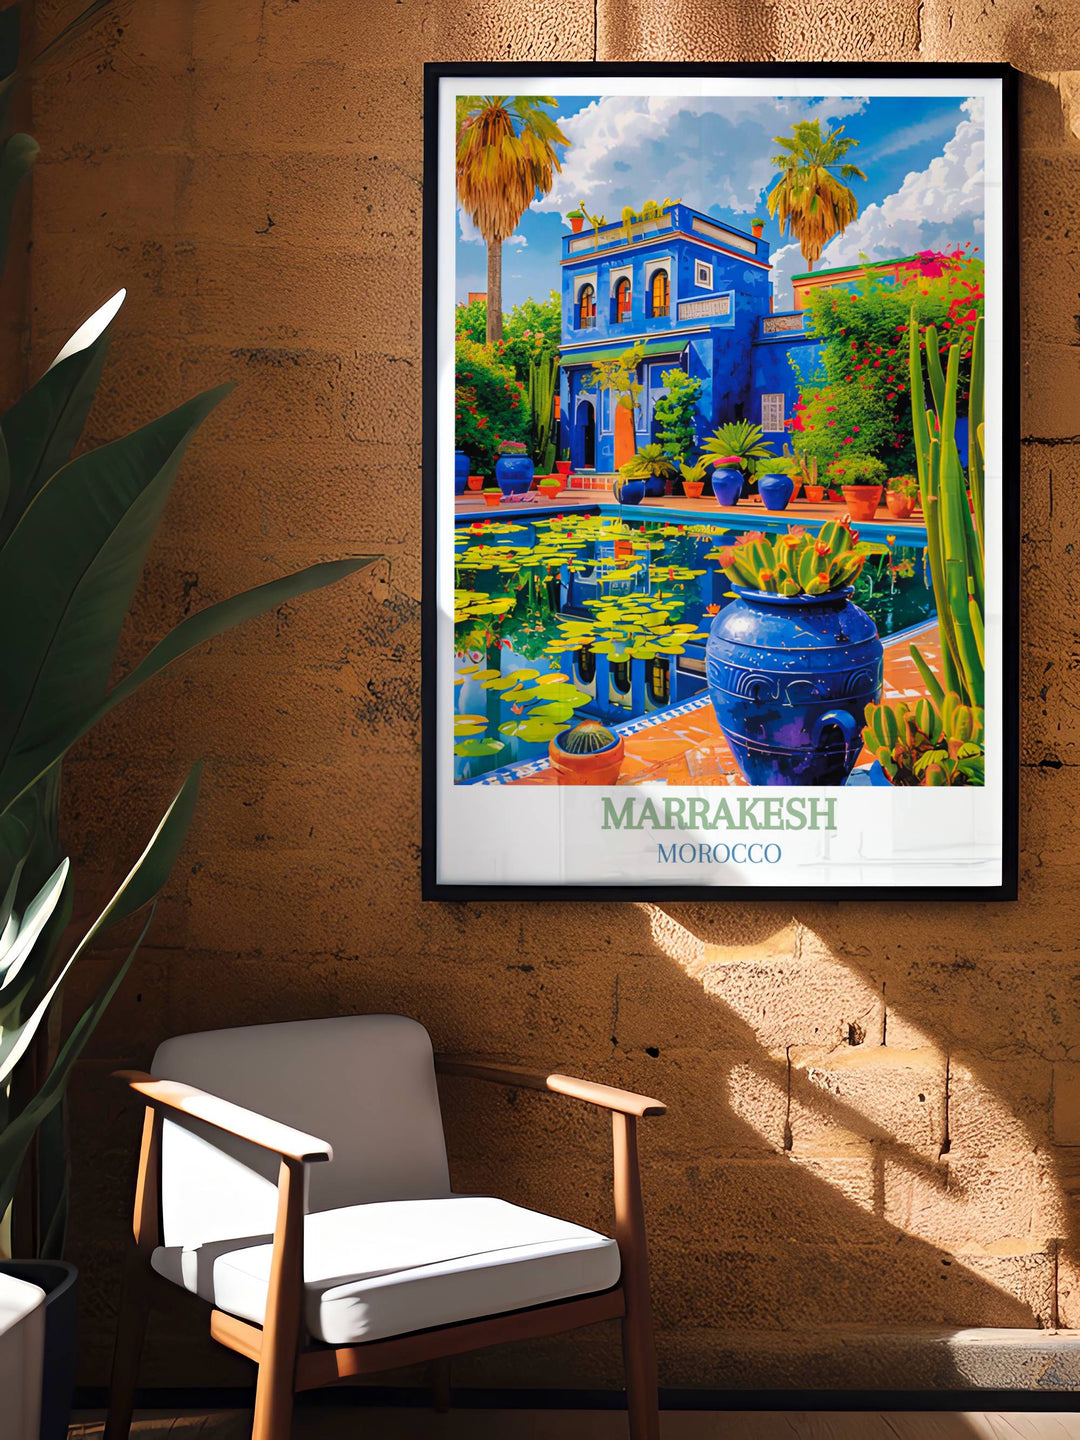 Majorelle Garden wall decor illustrates the calm and cooling atmosphere of the gardens shaded areas, complemented by the sound of trickling water features.